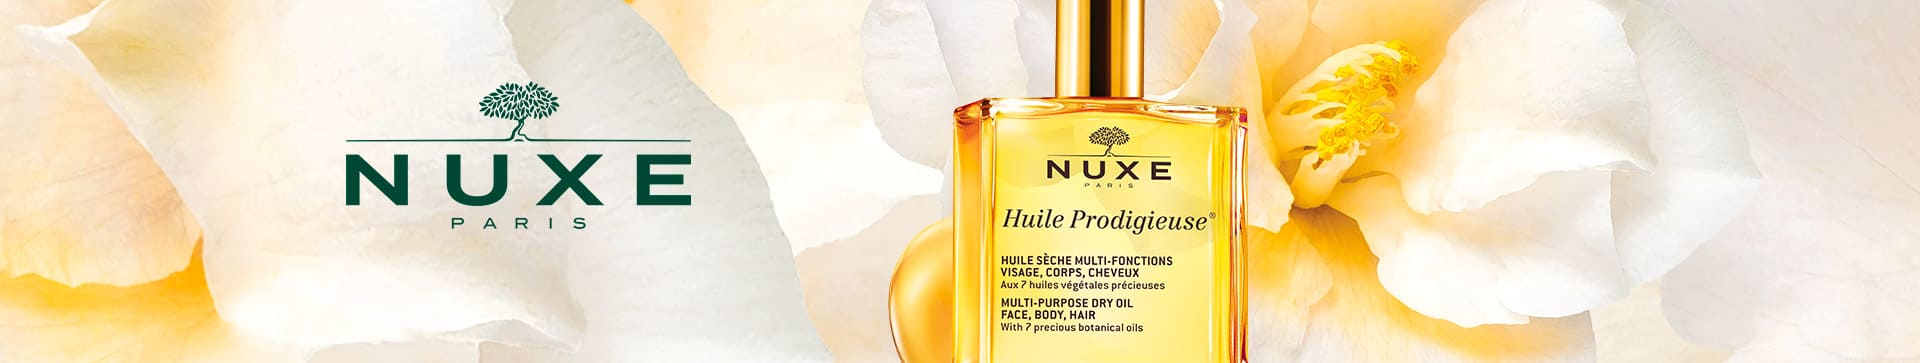 nuxe-perfumes-aceites